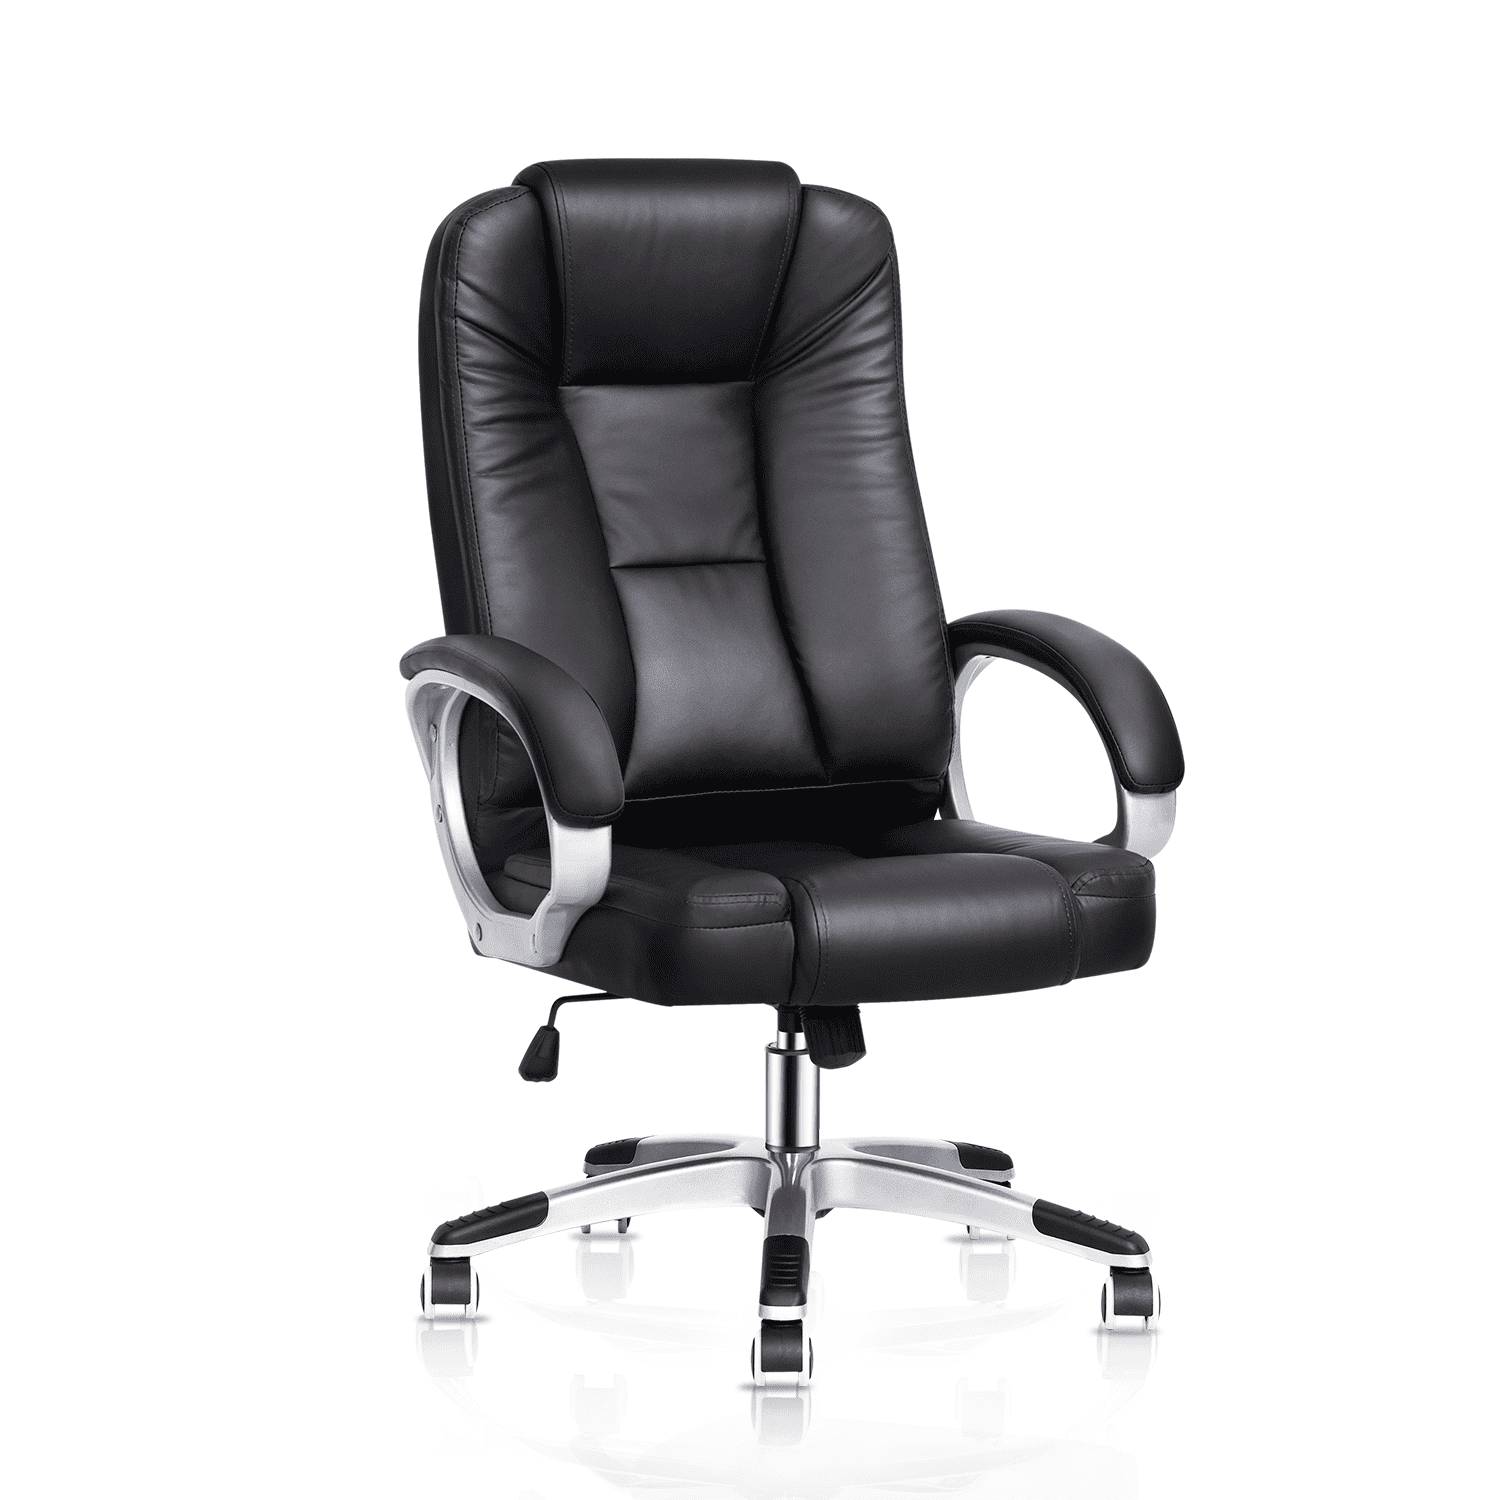 Black Boss Executive Leather Budget Chair 